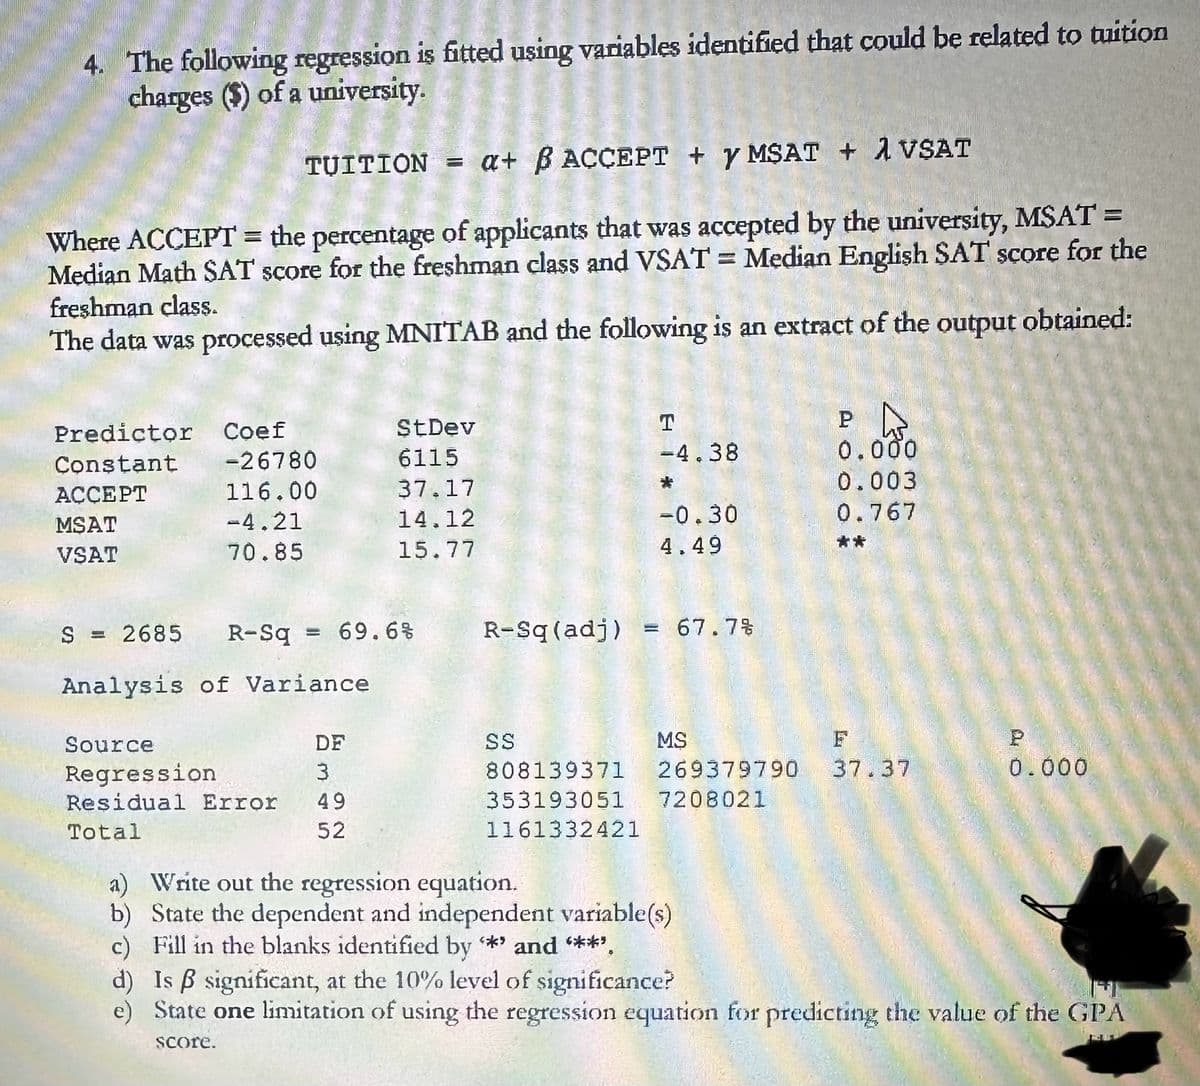 4. The following regression is fitted using variables identified that could be related to tuition
charges ($) of a university.
TUITION = a+ ẞ ACCEPT + y MSAT + 1 VSAT
Where ACCEPT = the percentage of applicants that was accepted by the university, MSAT =
Median Math SAT score for the freshman class and VSAT = Median English SAT score for the
freshman class.
The data was processed using MNITAB and the following is an extract of the output obtained:
Predictor Coef
StDev
Constant
-26780
6115
ACCEPT
116.00
37.17
MSAT
-4.21
14.12
VSAT
70.85
15.77
T
P
-4.38
0.000
0.003
-0.30
4.49
S = 2685
R-Sq = 69.6%
R-Sq (adj) = 67.7 %
Analysis of Variance
0.767
**
Source
DF
SS
MS
F
P
Regression
3
808139371
Residual Error
49
353193051
269379790
7208021
37.37
0.000
Total
52
1161332421
a) Write out the regression equation.
b) State the dependent and independent variable(s)
c) Fill in the blanks identified by *** and ****.
d) Is ẞ significant, at the 10% level of significance?
e) State one limitation of using the regression equation for predicting the value of the GPA
score.